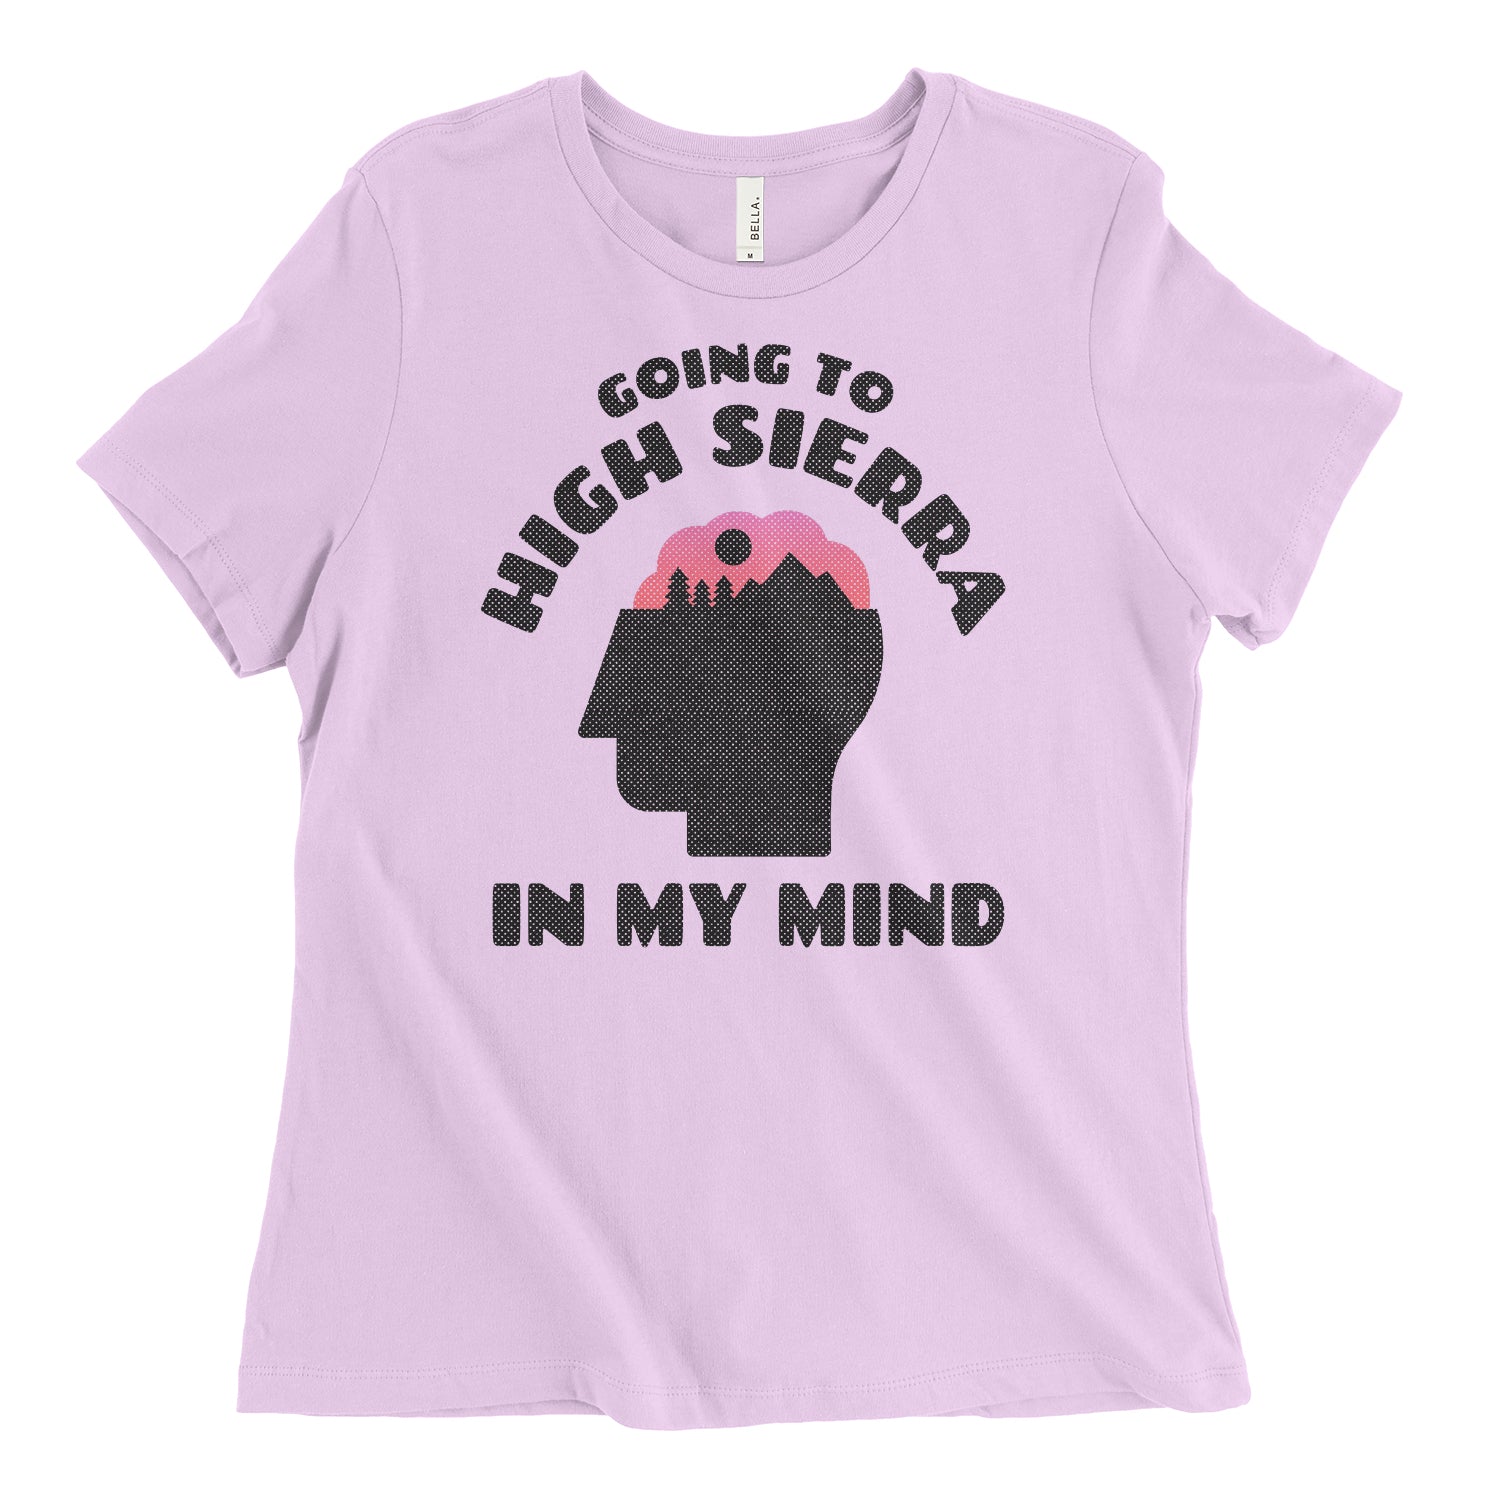 In My Mind Womens Relaxed Tee